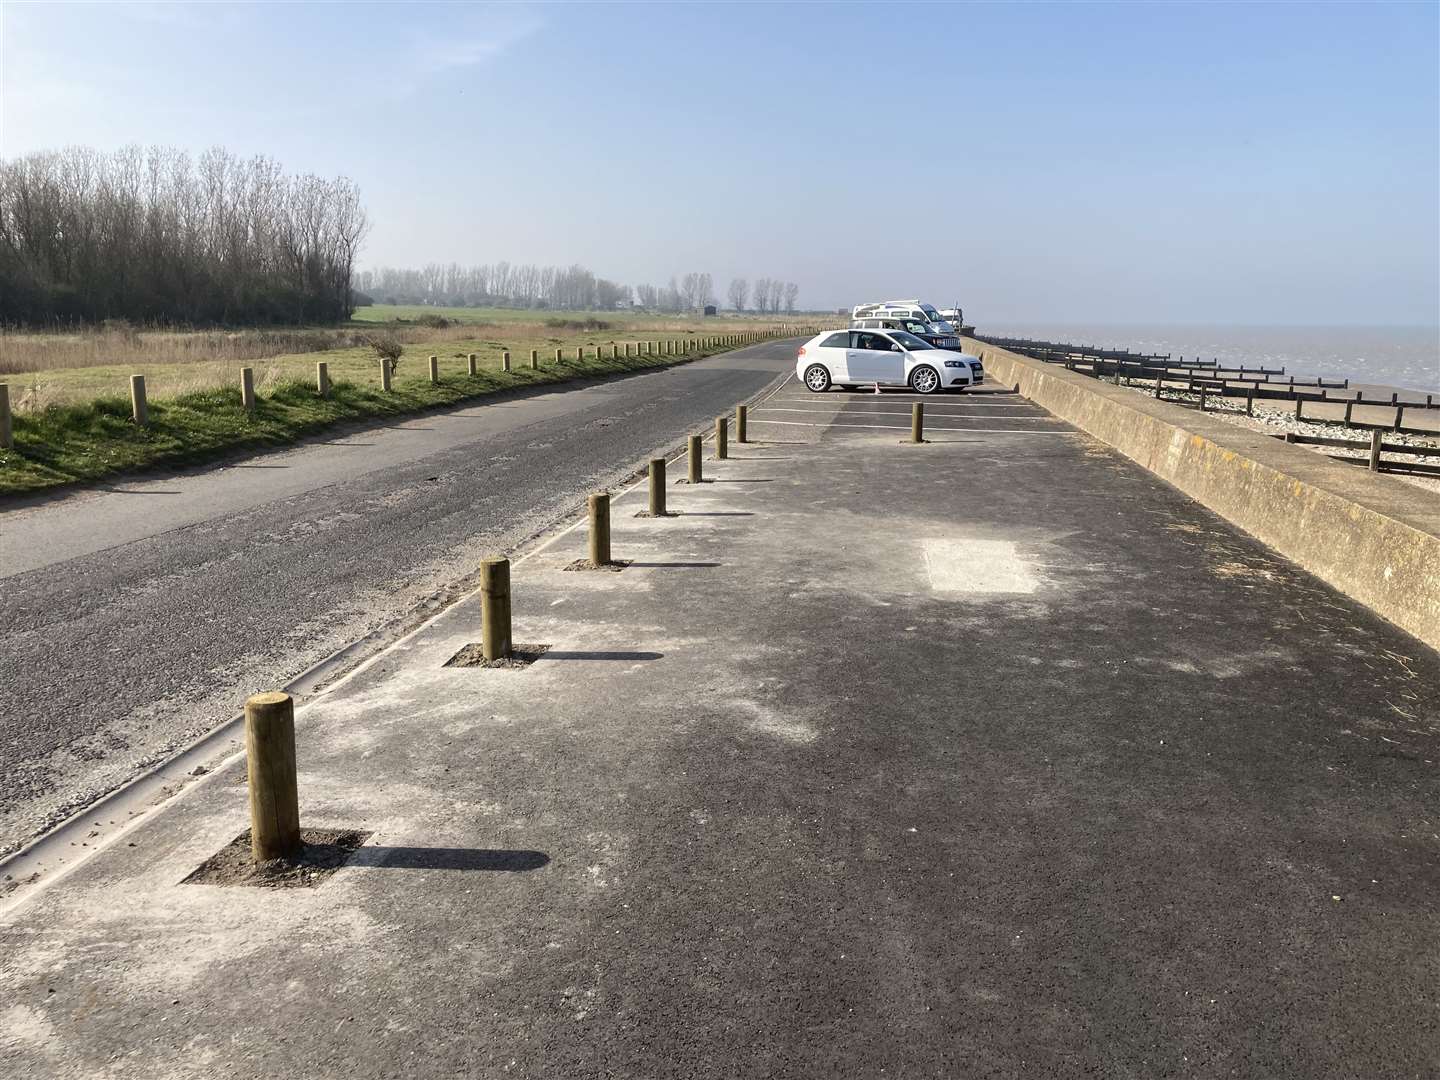 New bollards stop coach parking on the seafront at Shellness